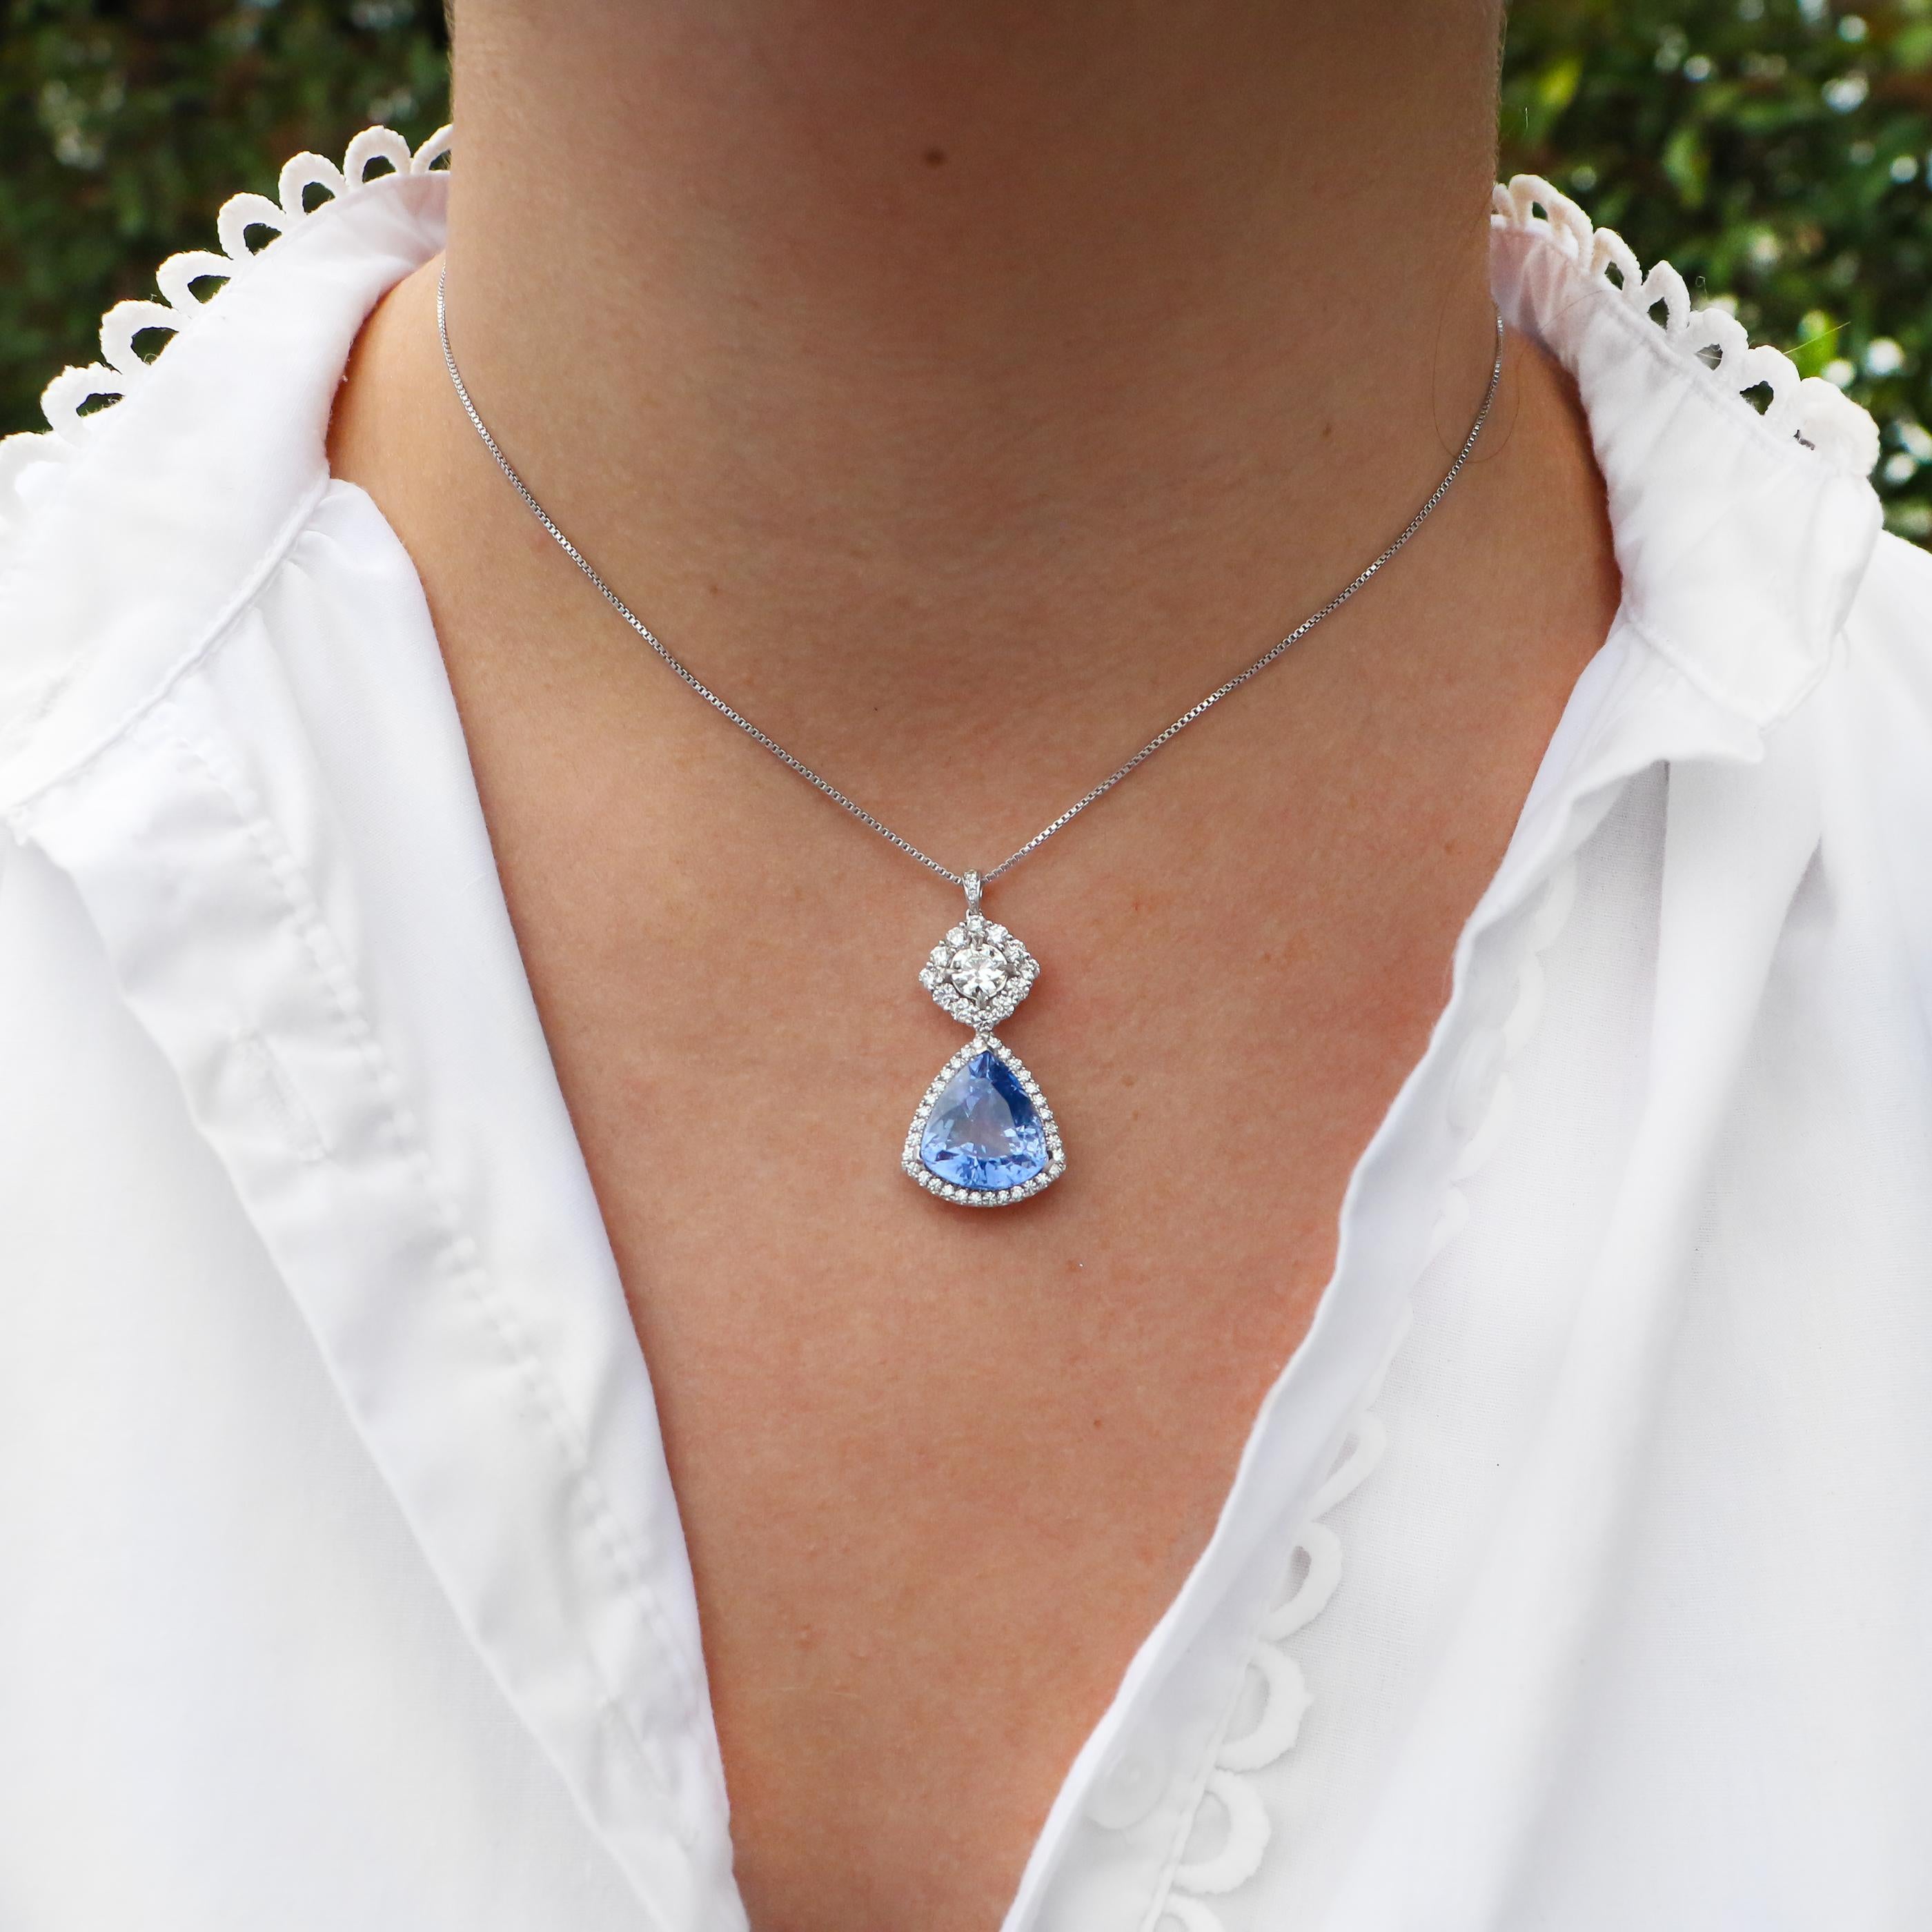 Apart of the wide variety of jewelry we have for sale. This pendant boasts a beautiful sapphire, surrounded by diamonds. The sapphires trillion cut makes the light reflect off of each beautiful edge.

• 10.50 Carat Sapphire
• GIA Certified
• 2.25